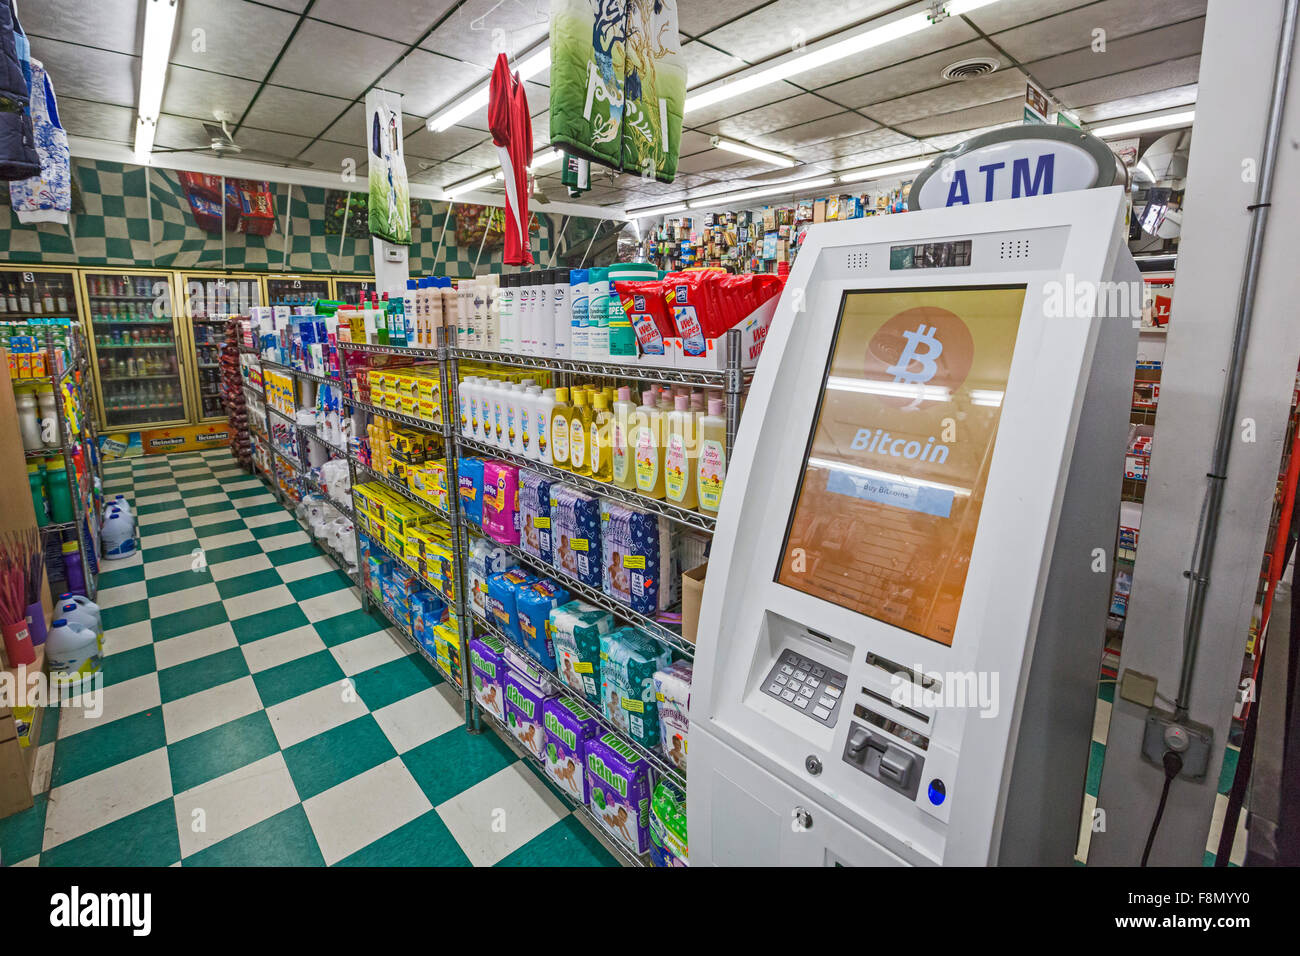 Detroit, Michigan - A Bitcoin ATM next to diapers and shampoo at Timmy's Market, a corner convenience store. Stock Photo